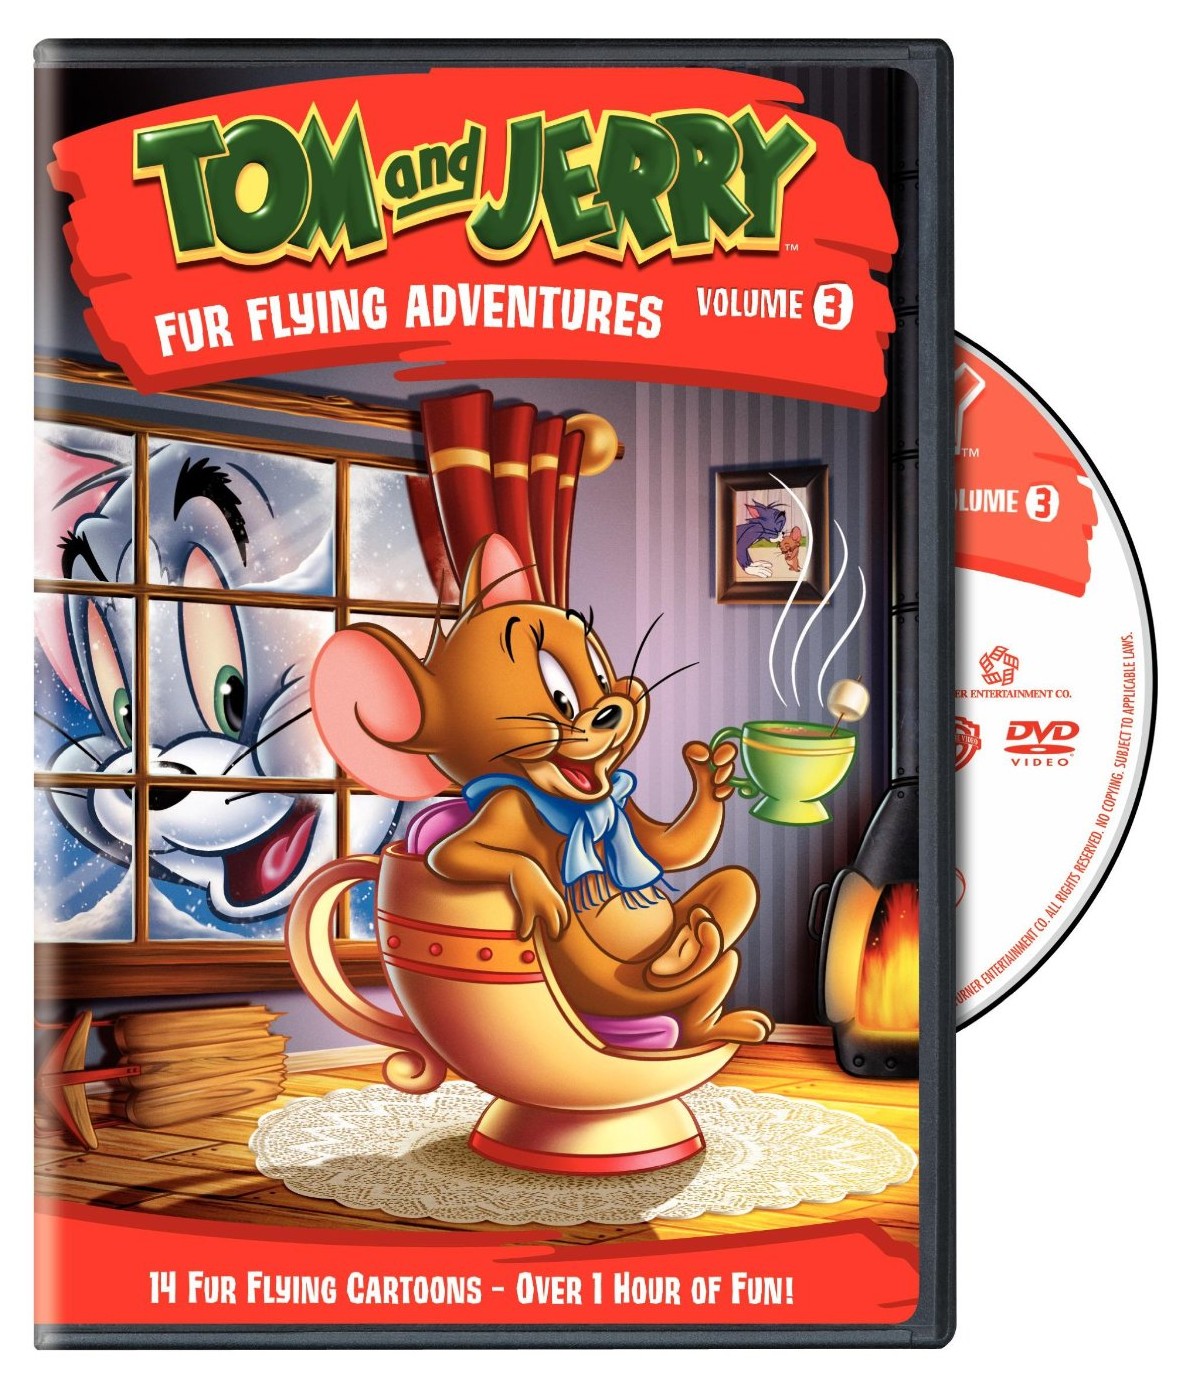 Win Tom and Jerry on DVD!